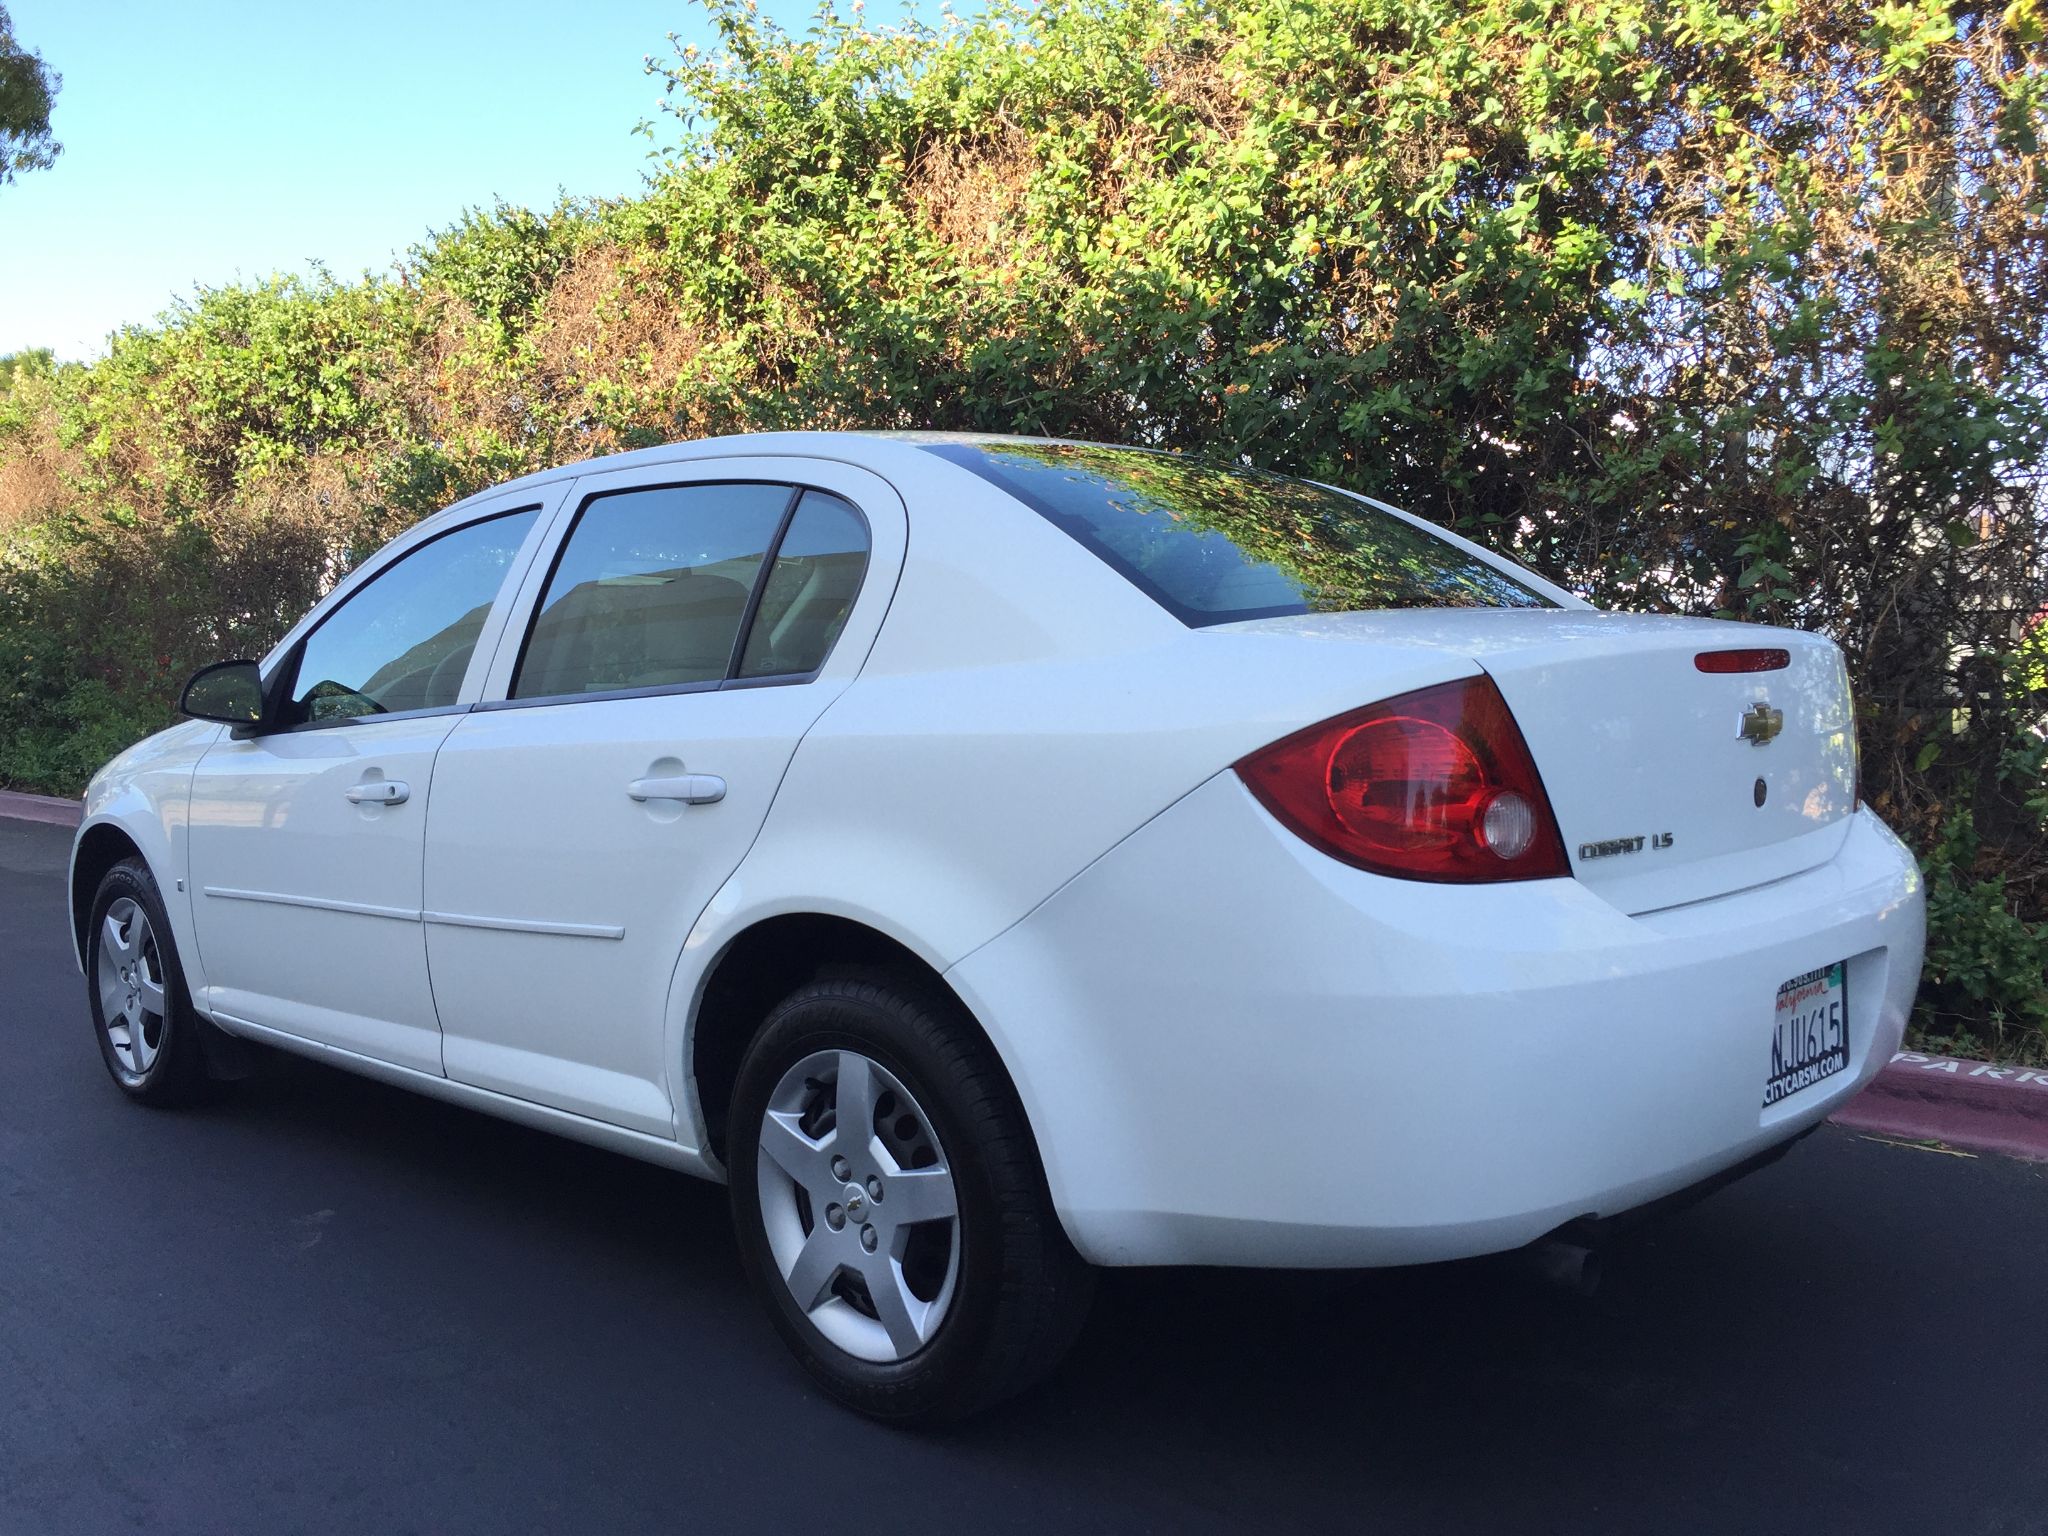 Used 2006 Chevrolet Cobalt LS at City Cars Warehouse INC